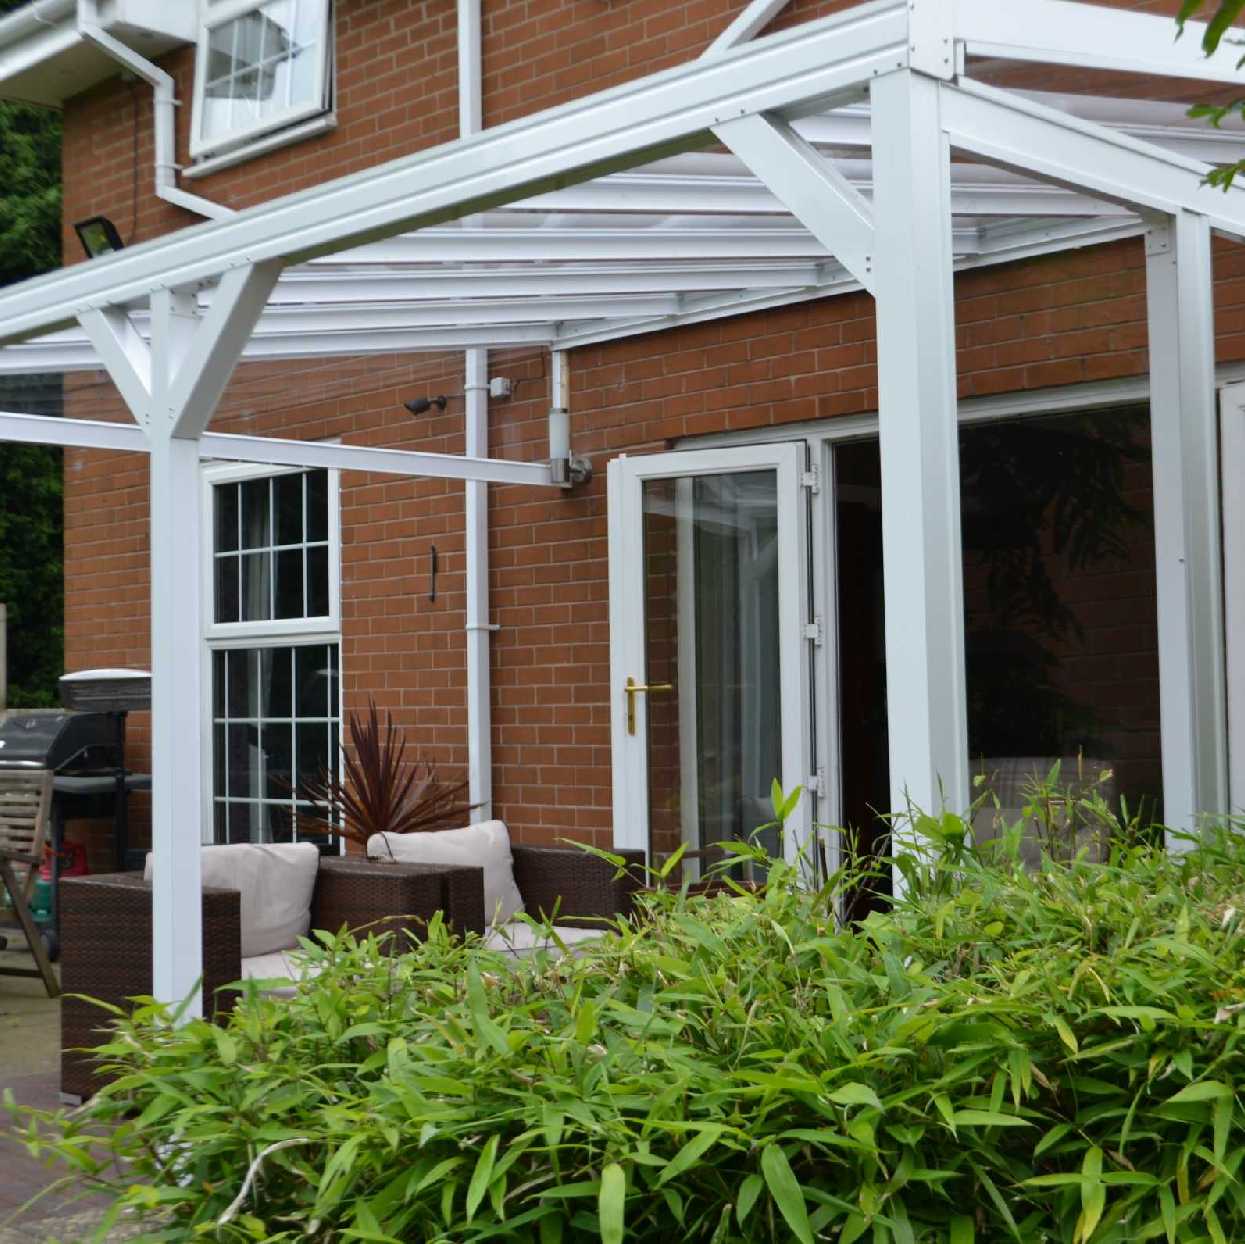 Omega Smart Lean-To Canopy, White with 6mm Glass Clear Plate Polycarbonate Glazing - 4.9m (W) x 2.0m (P), (3) Supporting Posts from Omega Build